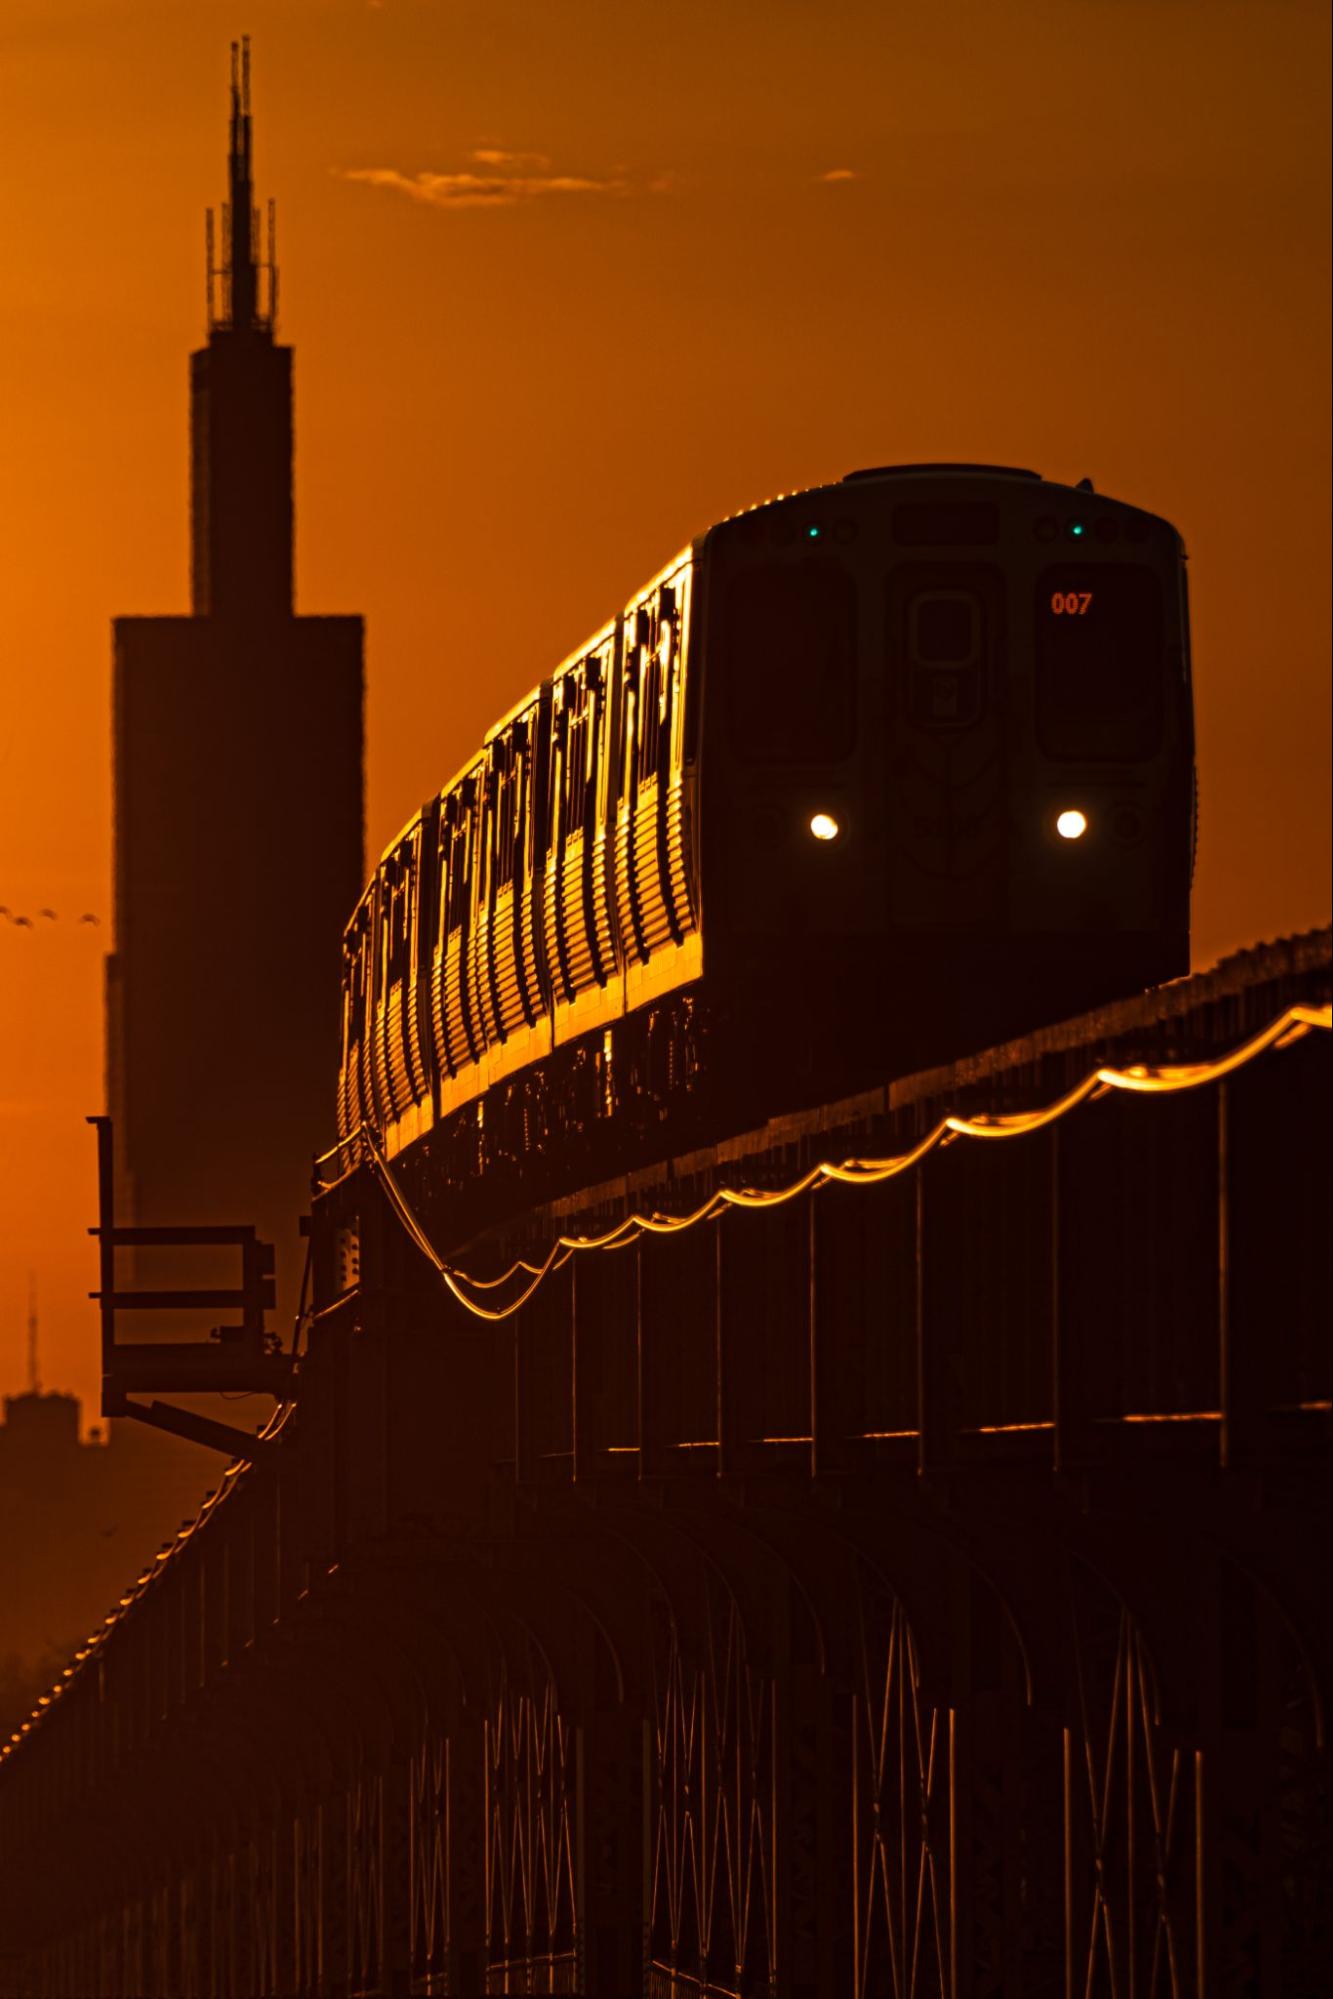 A train from Chicago's L line riding across the tracks at sunrise with the Willis Tower (formerly the Sears Tower) in the background